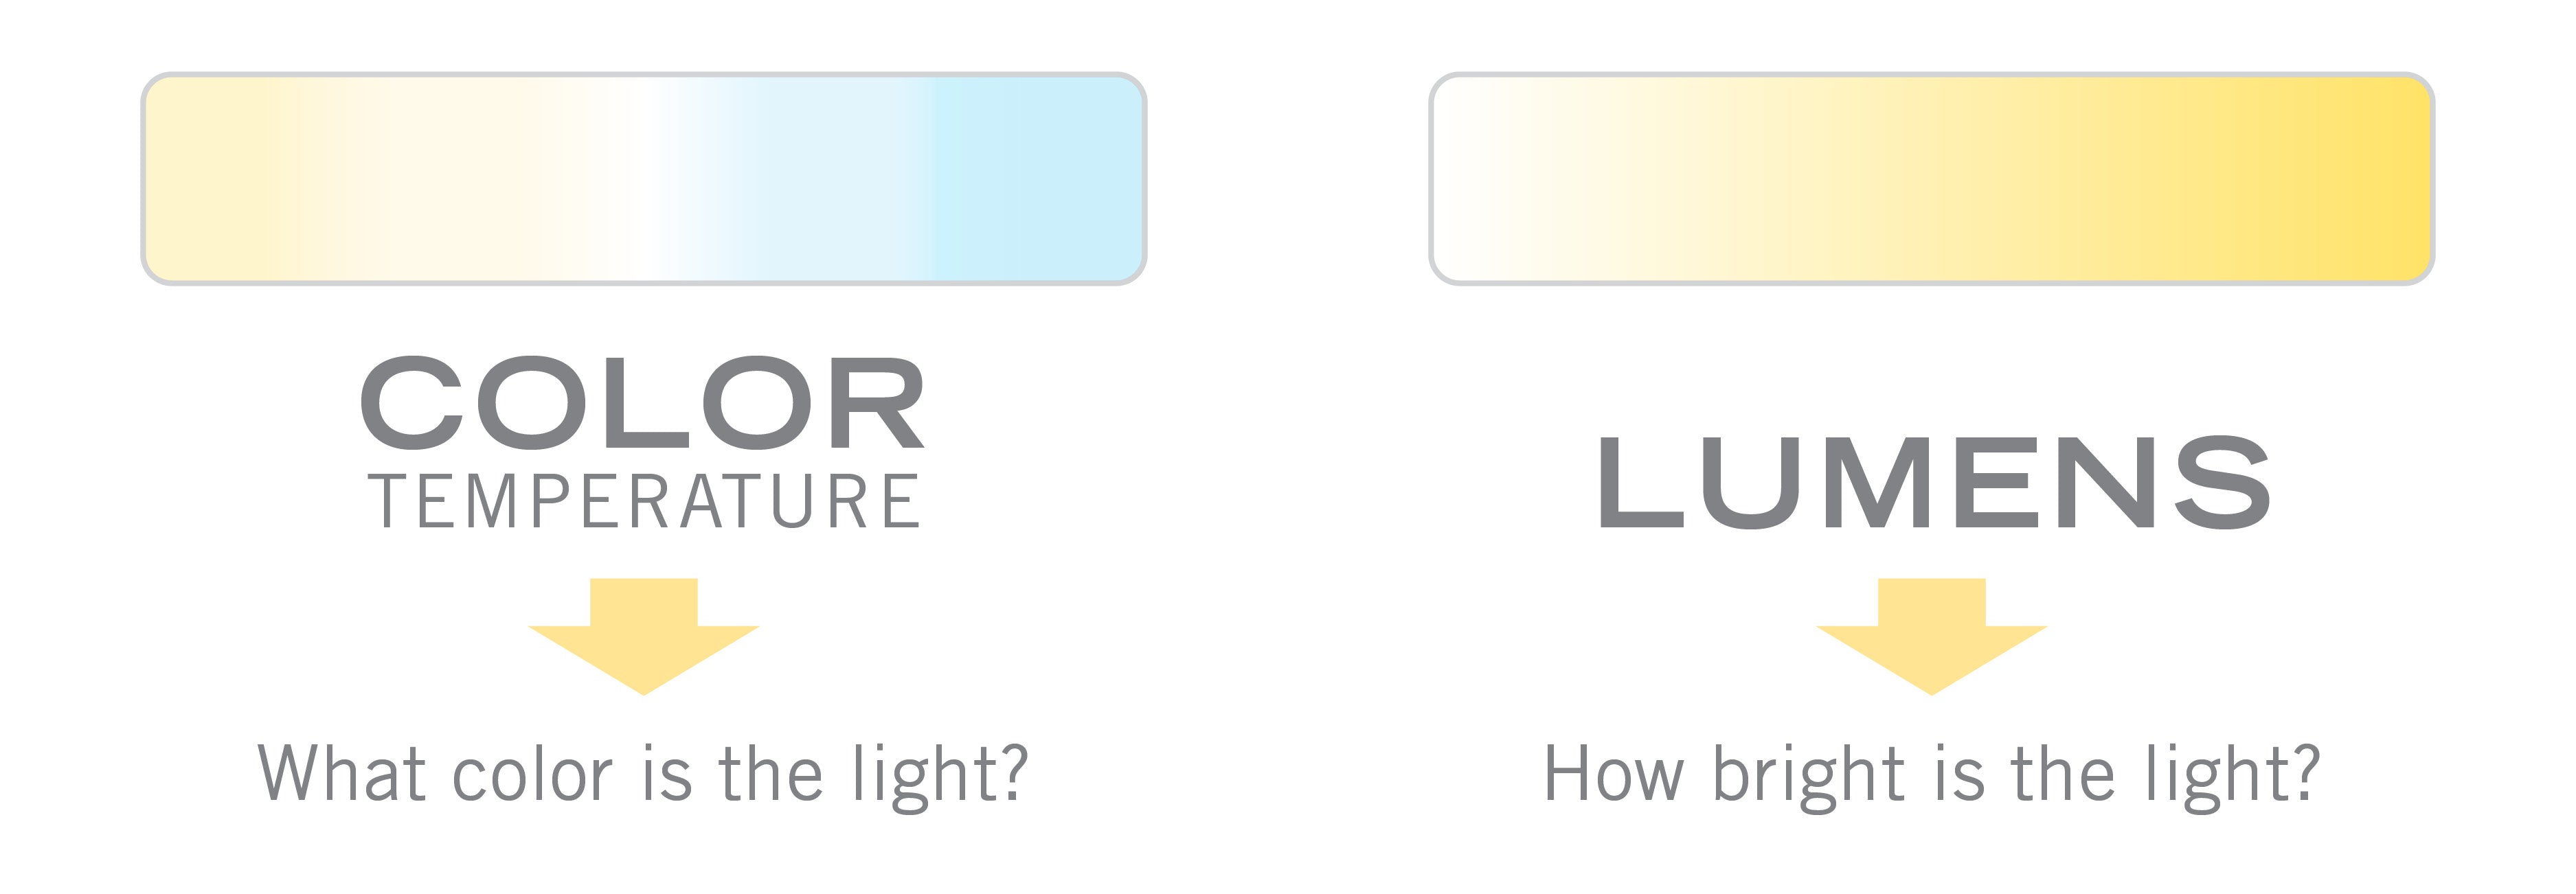 Color temperature = What color is the light? Lumens = How bright is the light?